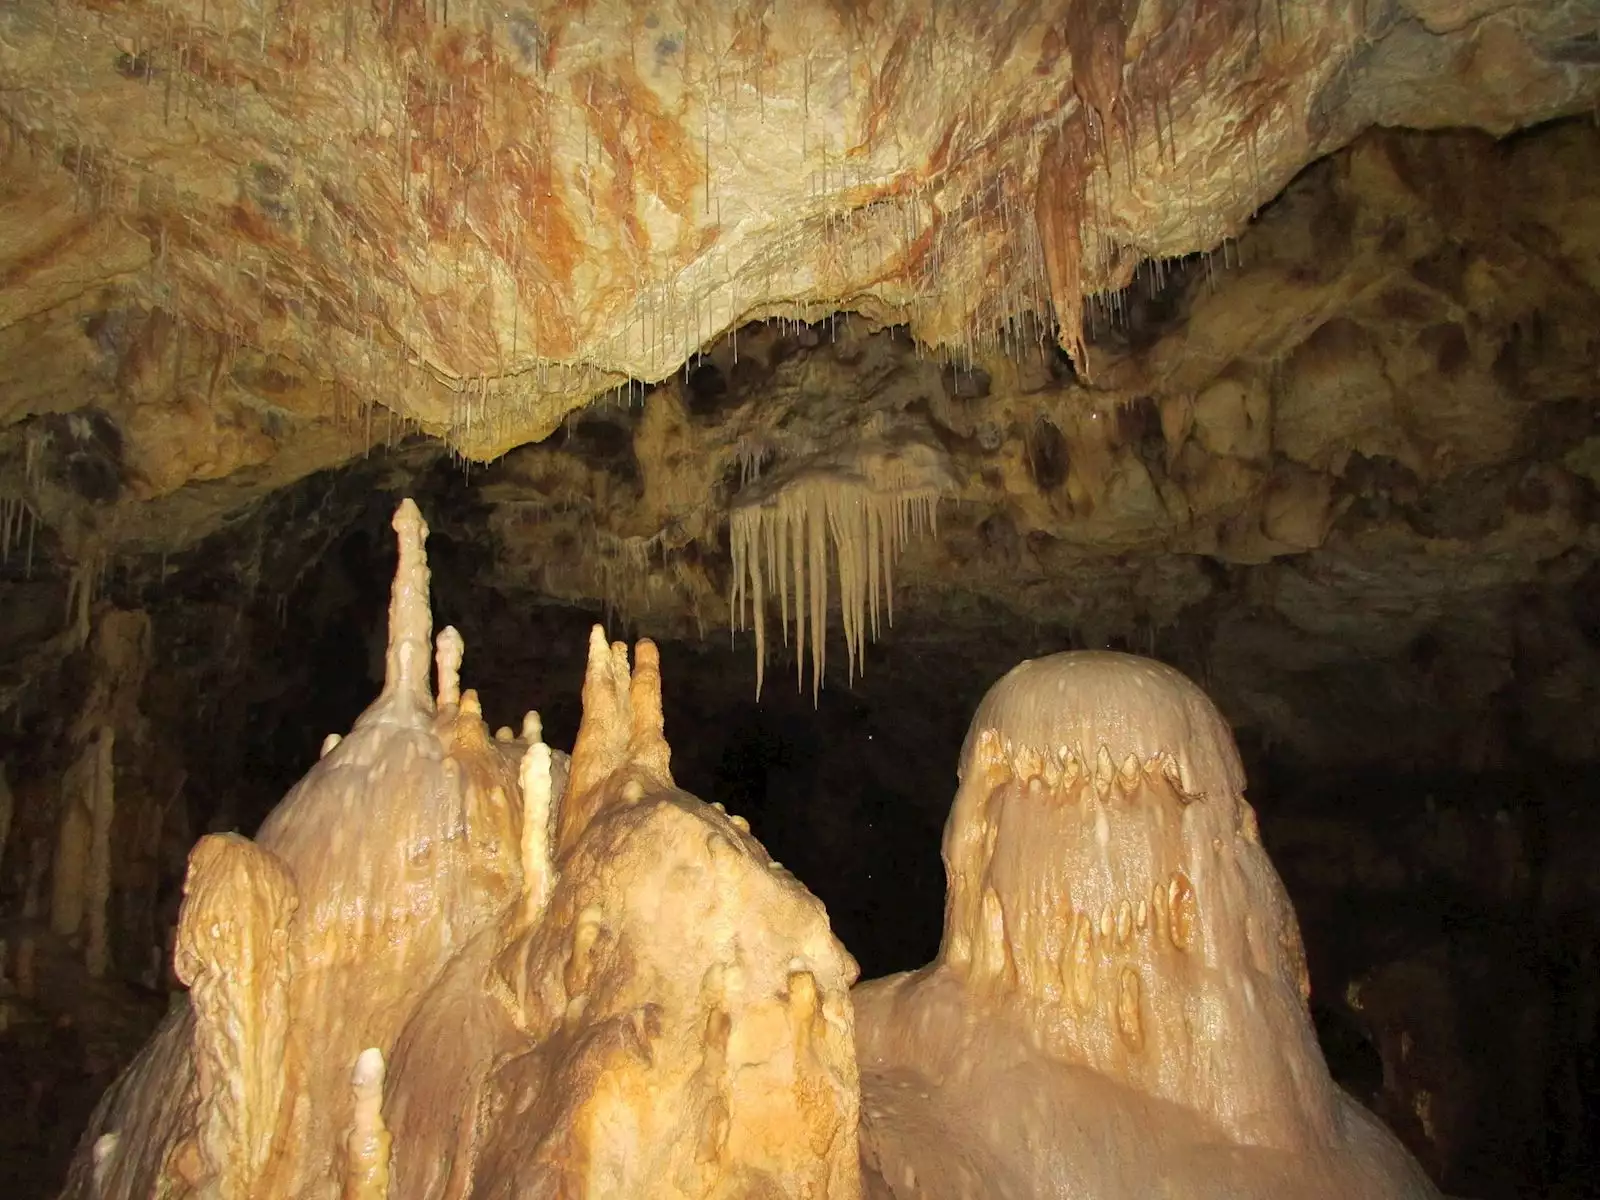 Stalactites and stalagmites in caves